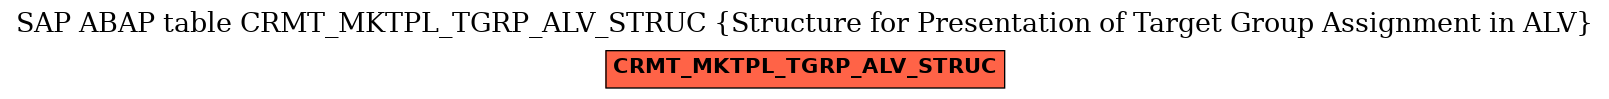 E-R Diagram for table CRMT_MKTPL_TGRP_ALV_STRUC (Structure for Presentation of Target Group Assignment in ALV)